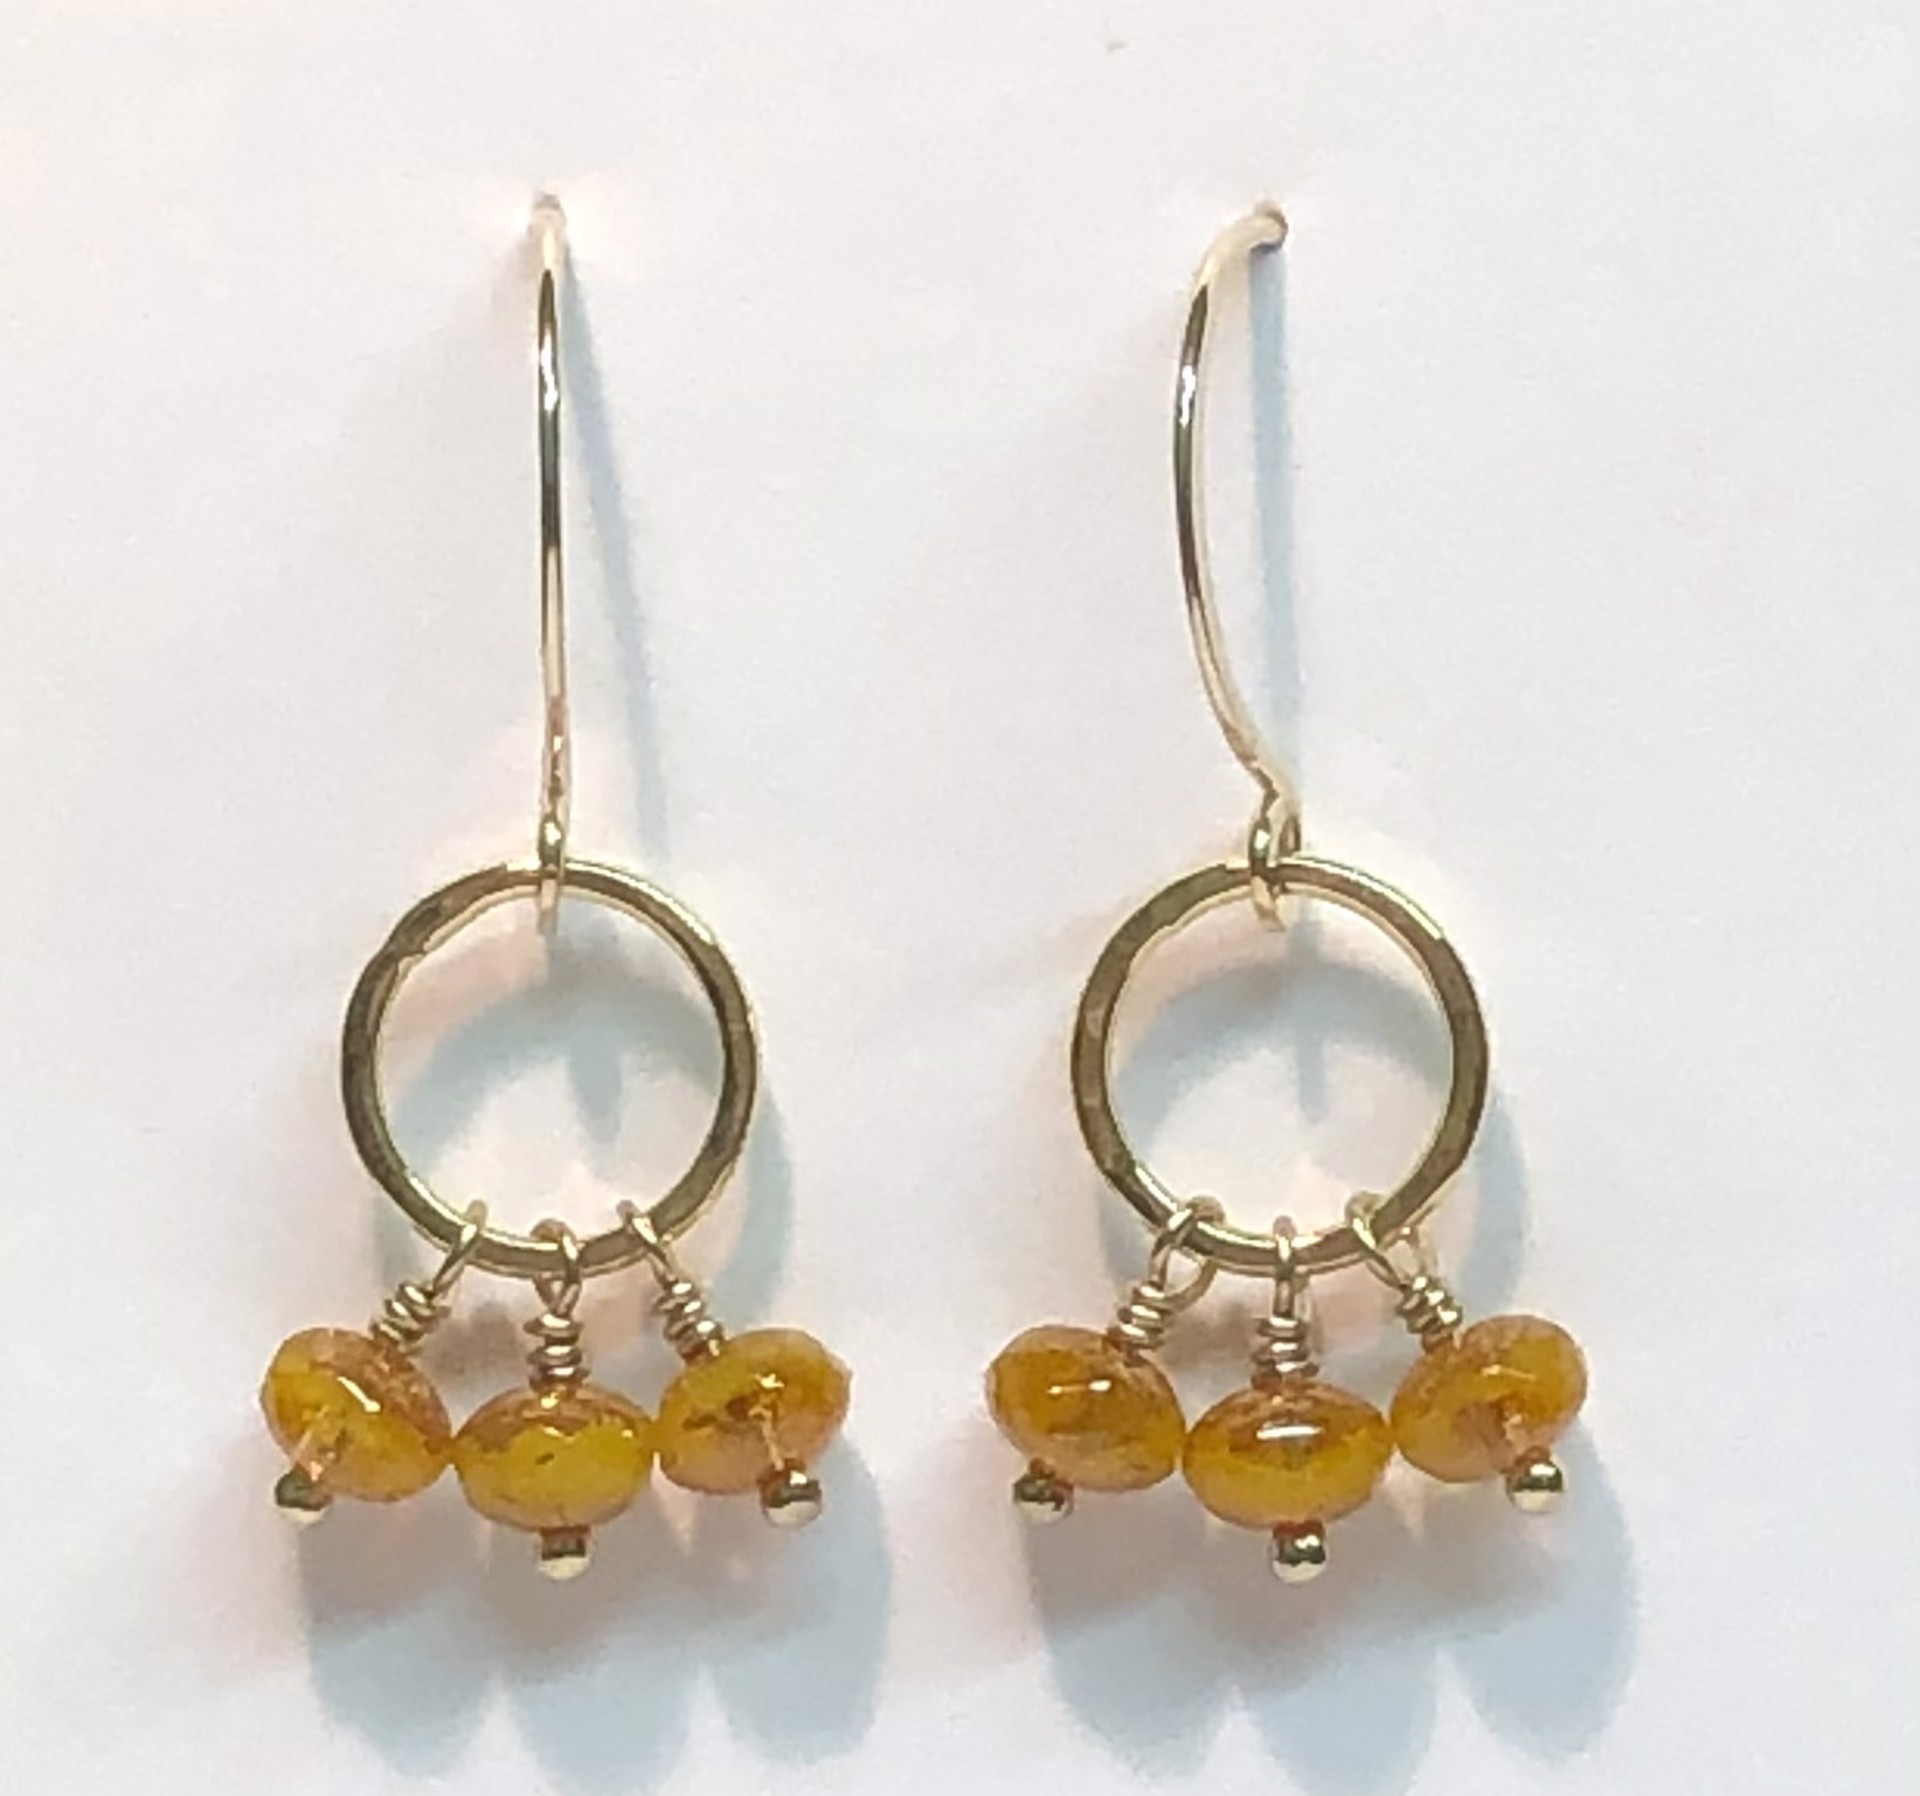 Honey Gold Czech with Large Ring Earrings, 14K Gold Filled by Amelia Whelan